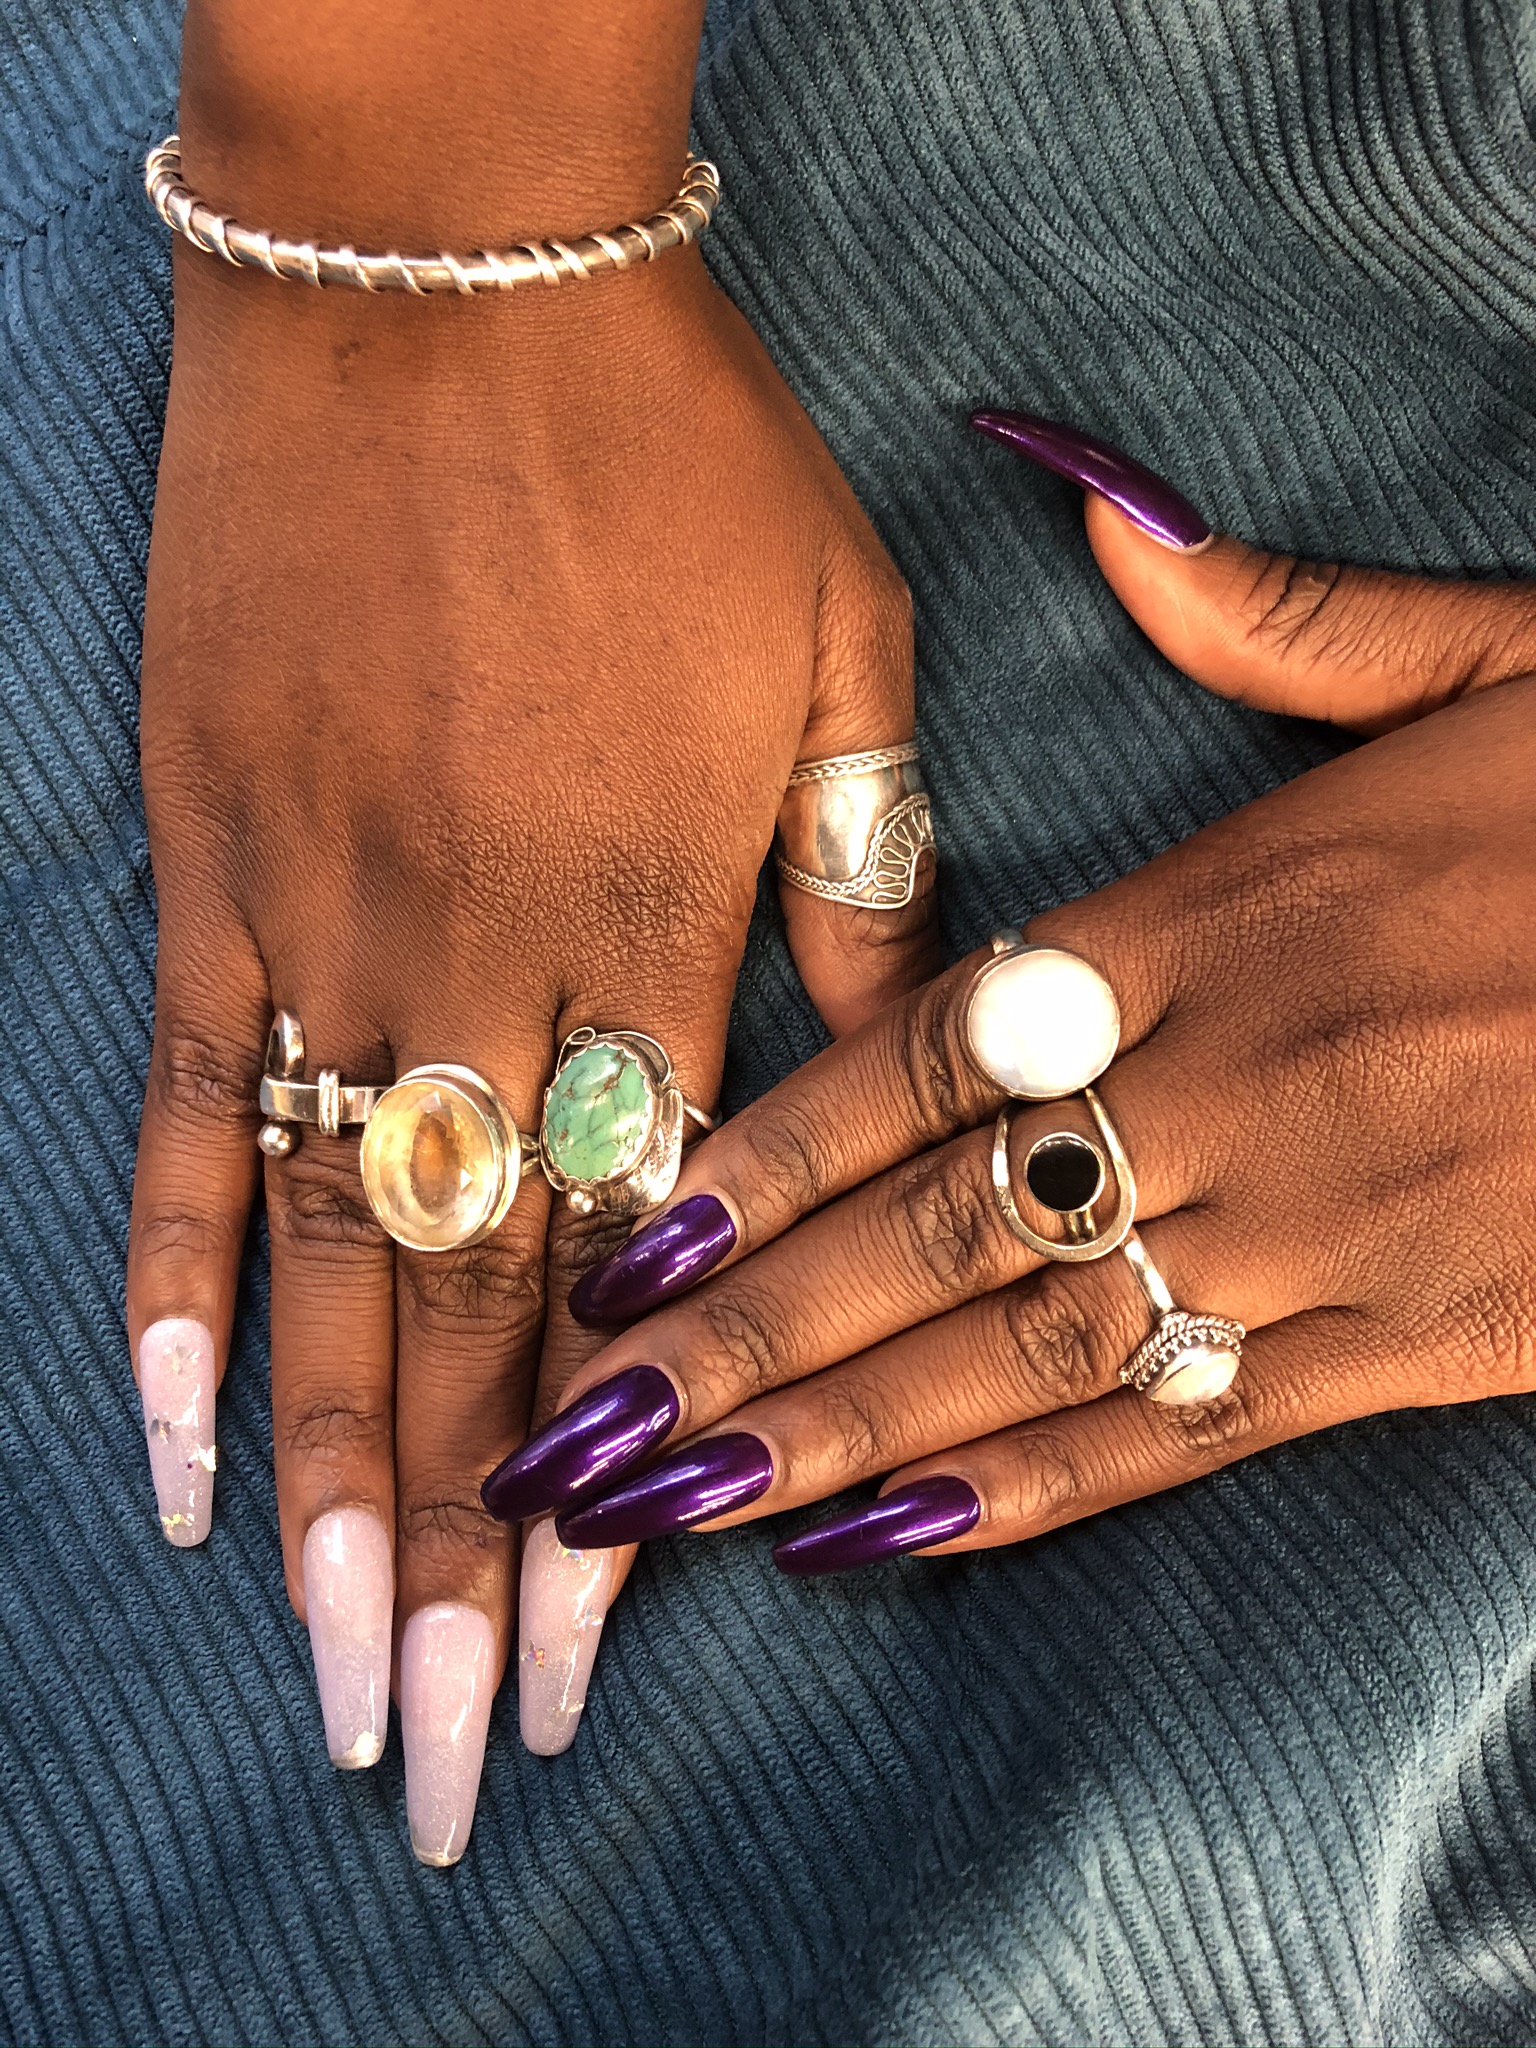 Hand with pink and purple long fake nails wearing several rings